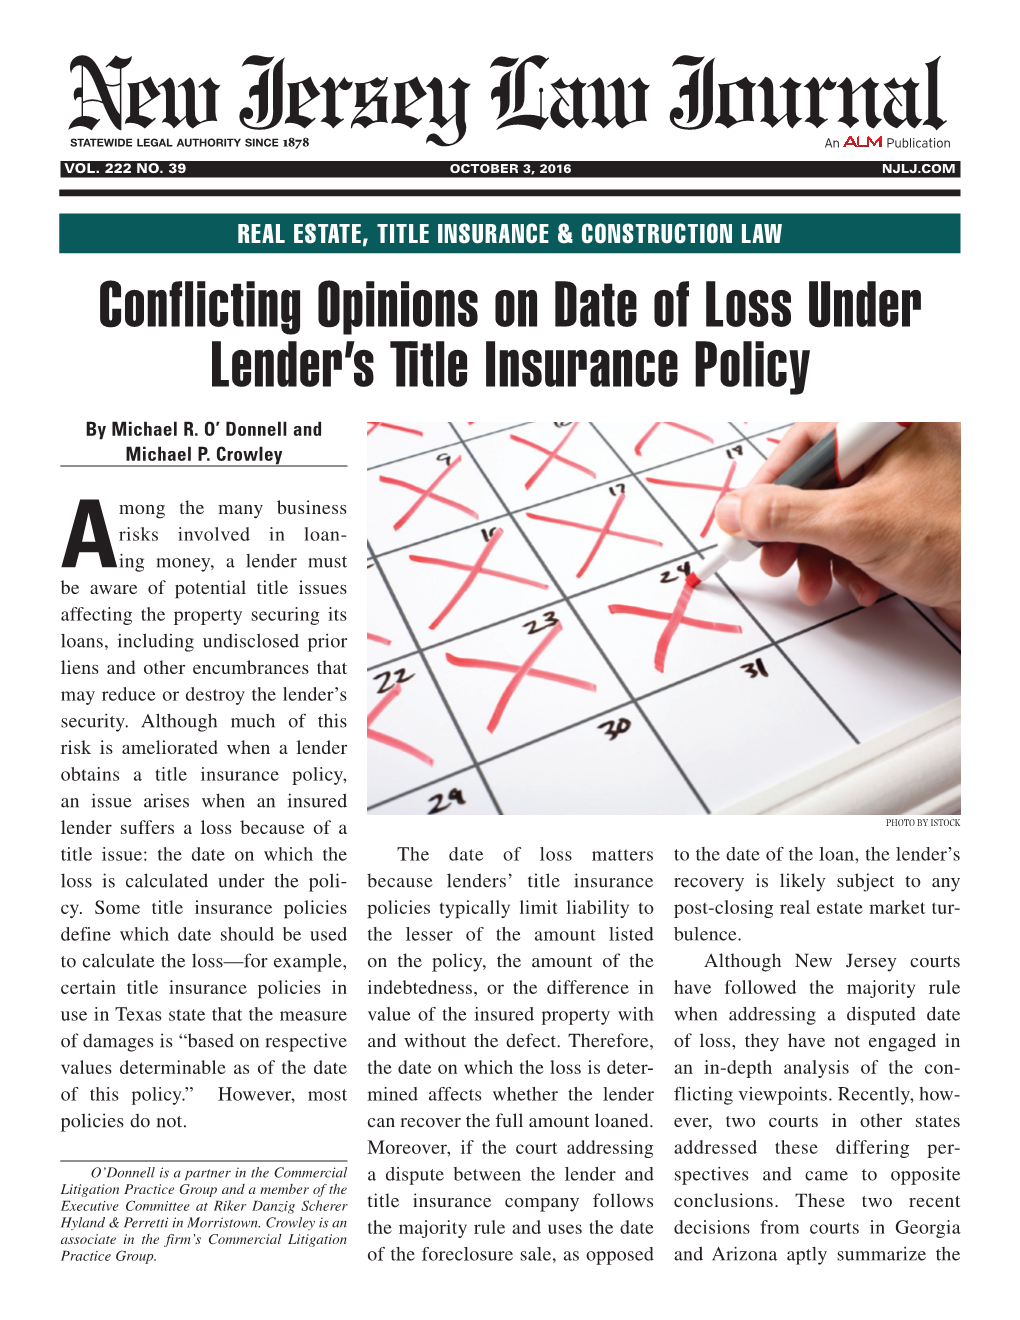 Conflicting Opinions on Date of Loss Under Lender's Title Insurance Policy